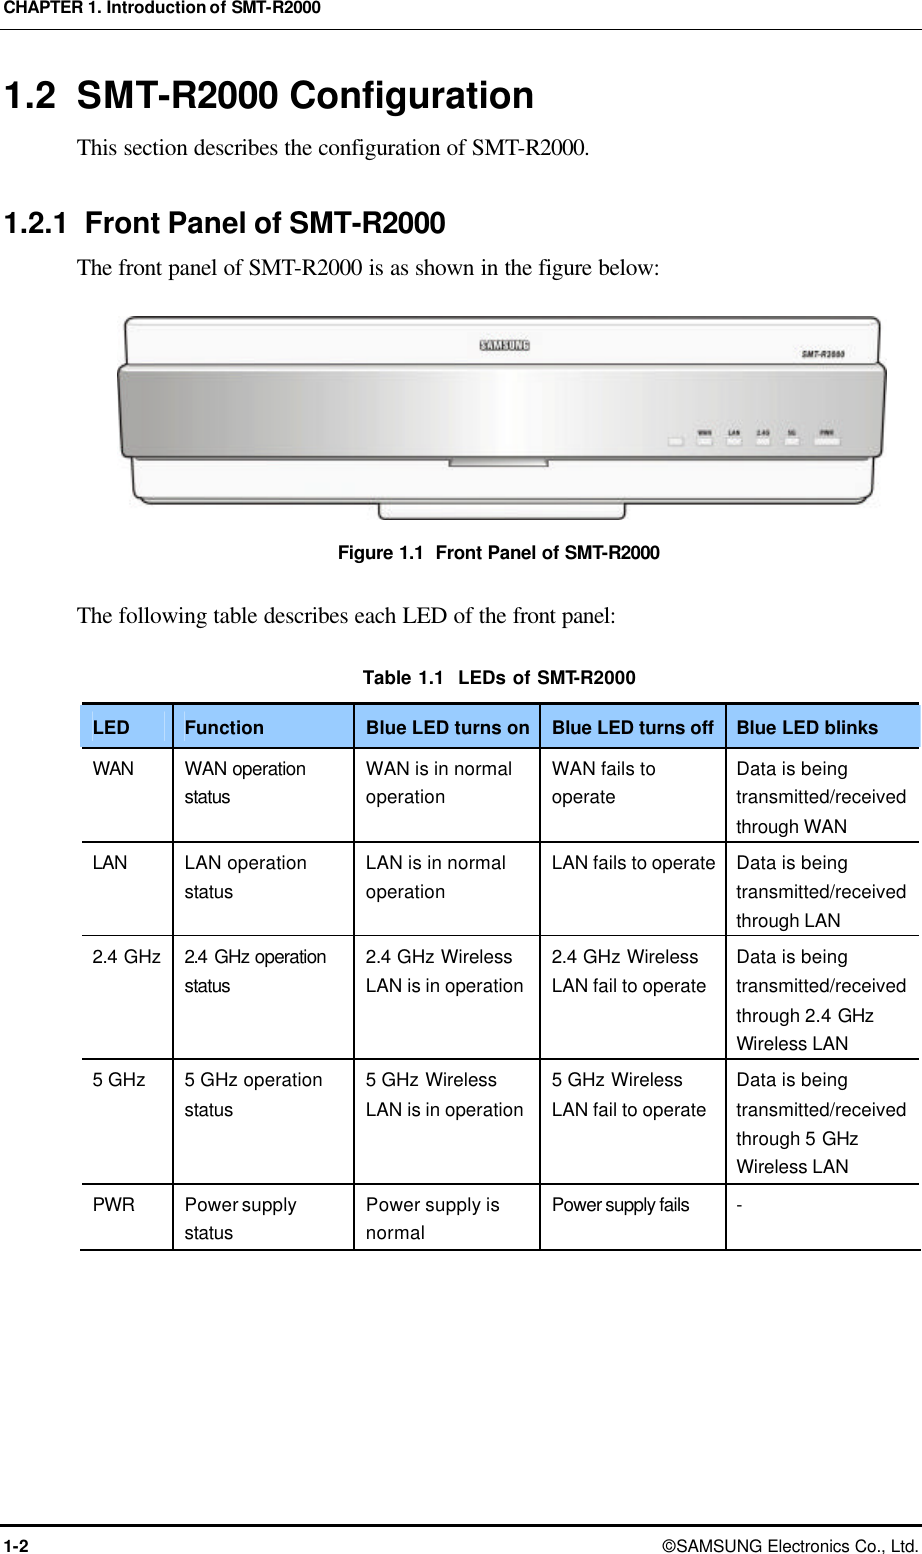 CHAPTER 1. Introduction of SMT-R2000 1-2 © SAMSUNG Electronics Co., Ltd. 1.2 SMT-R2000 Configuration This section describes the configuration of SMT-R2000.  1.2.1 Front Panel of SMT-R2000 The front panel of SMT-R2000 is as shown in the figure below:  Figure 1.1  Front Panel of SMT-R2000  The following table describes each LED of the front panel:  Table 1.1  LEDs of SMT-R2000 LED Function Blue LED turns on Blue LED turns off  Blue LED blinks WAN WAN operation status WAN is in normal operation WAN fails to operate Data is being transmitted/received through WAN LAN LAN operation status  LAN is in normal operation LAN fails to operate Data is being transmitted/received through LAN 2.4 GHz 2.4  GHz operation status 2.4 GHz Wireless LAN is in operation 2.4 GHz Wireless LAN fail to operate Data is being transmitted/received through 2.4 GHz Wireless LAN 5 GHz 5 GHz operation status  5 GHz Wireless LAN is in operation 5 GHz Wireless LAN fail to operate Data is being transmitted/received through 5 GHz Wireless LAN PWR Power supply status  Power supply is normal Power supply fails -  